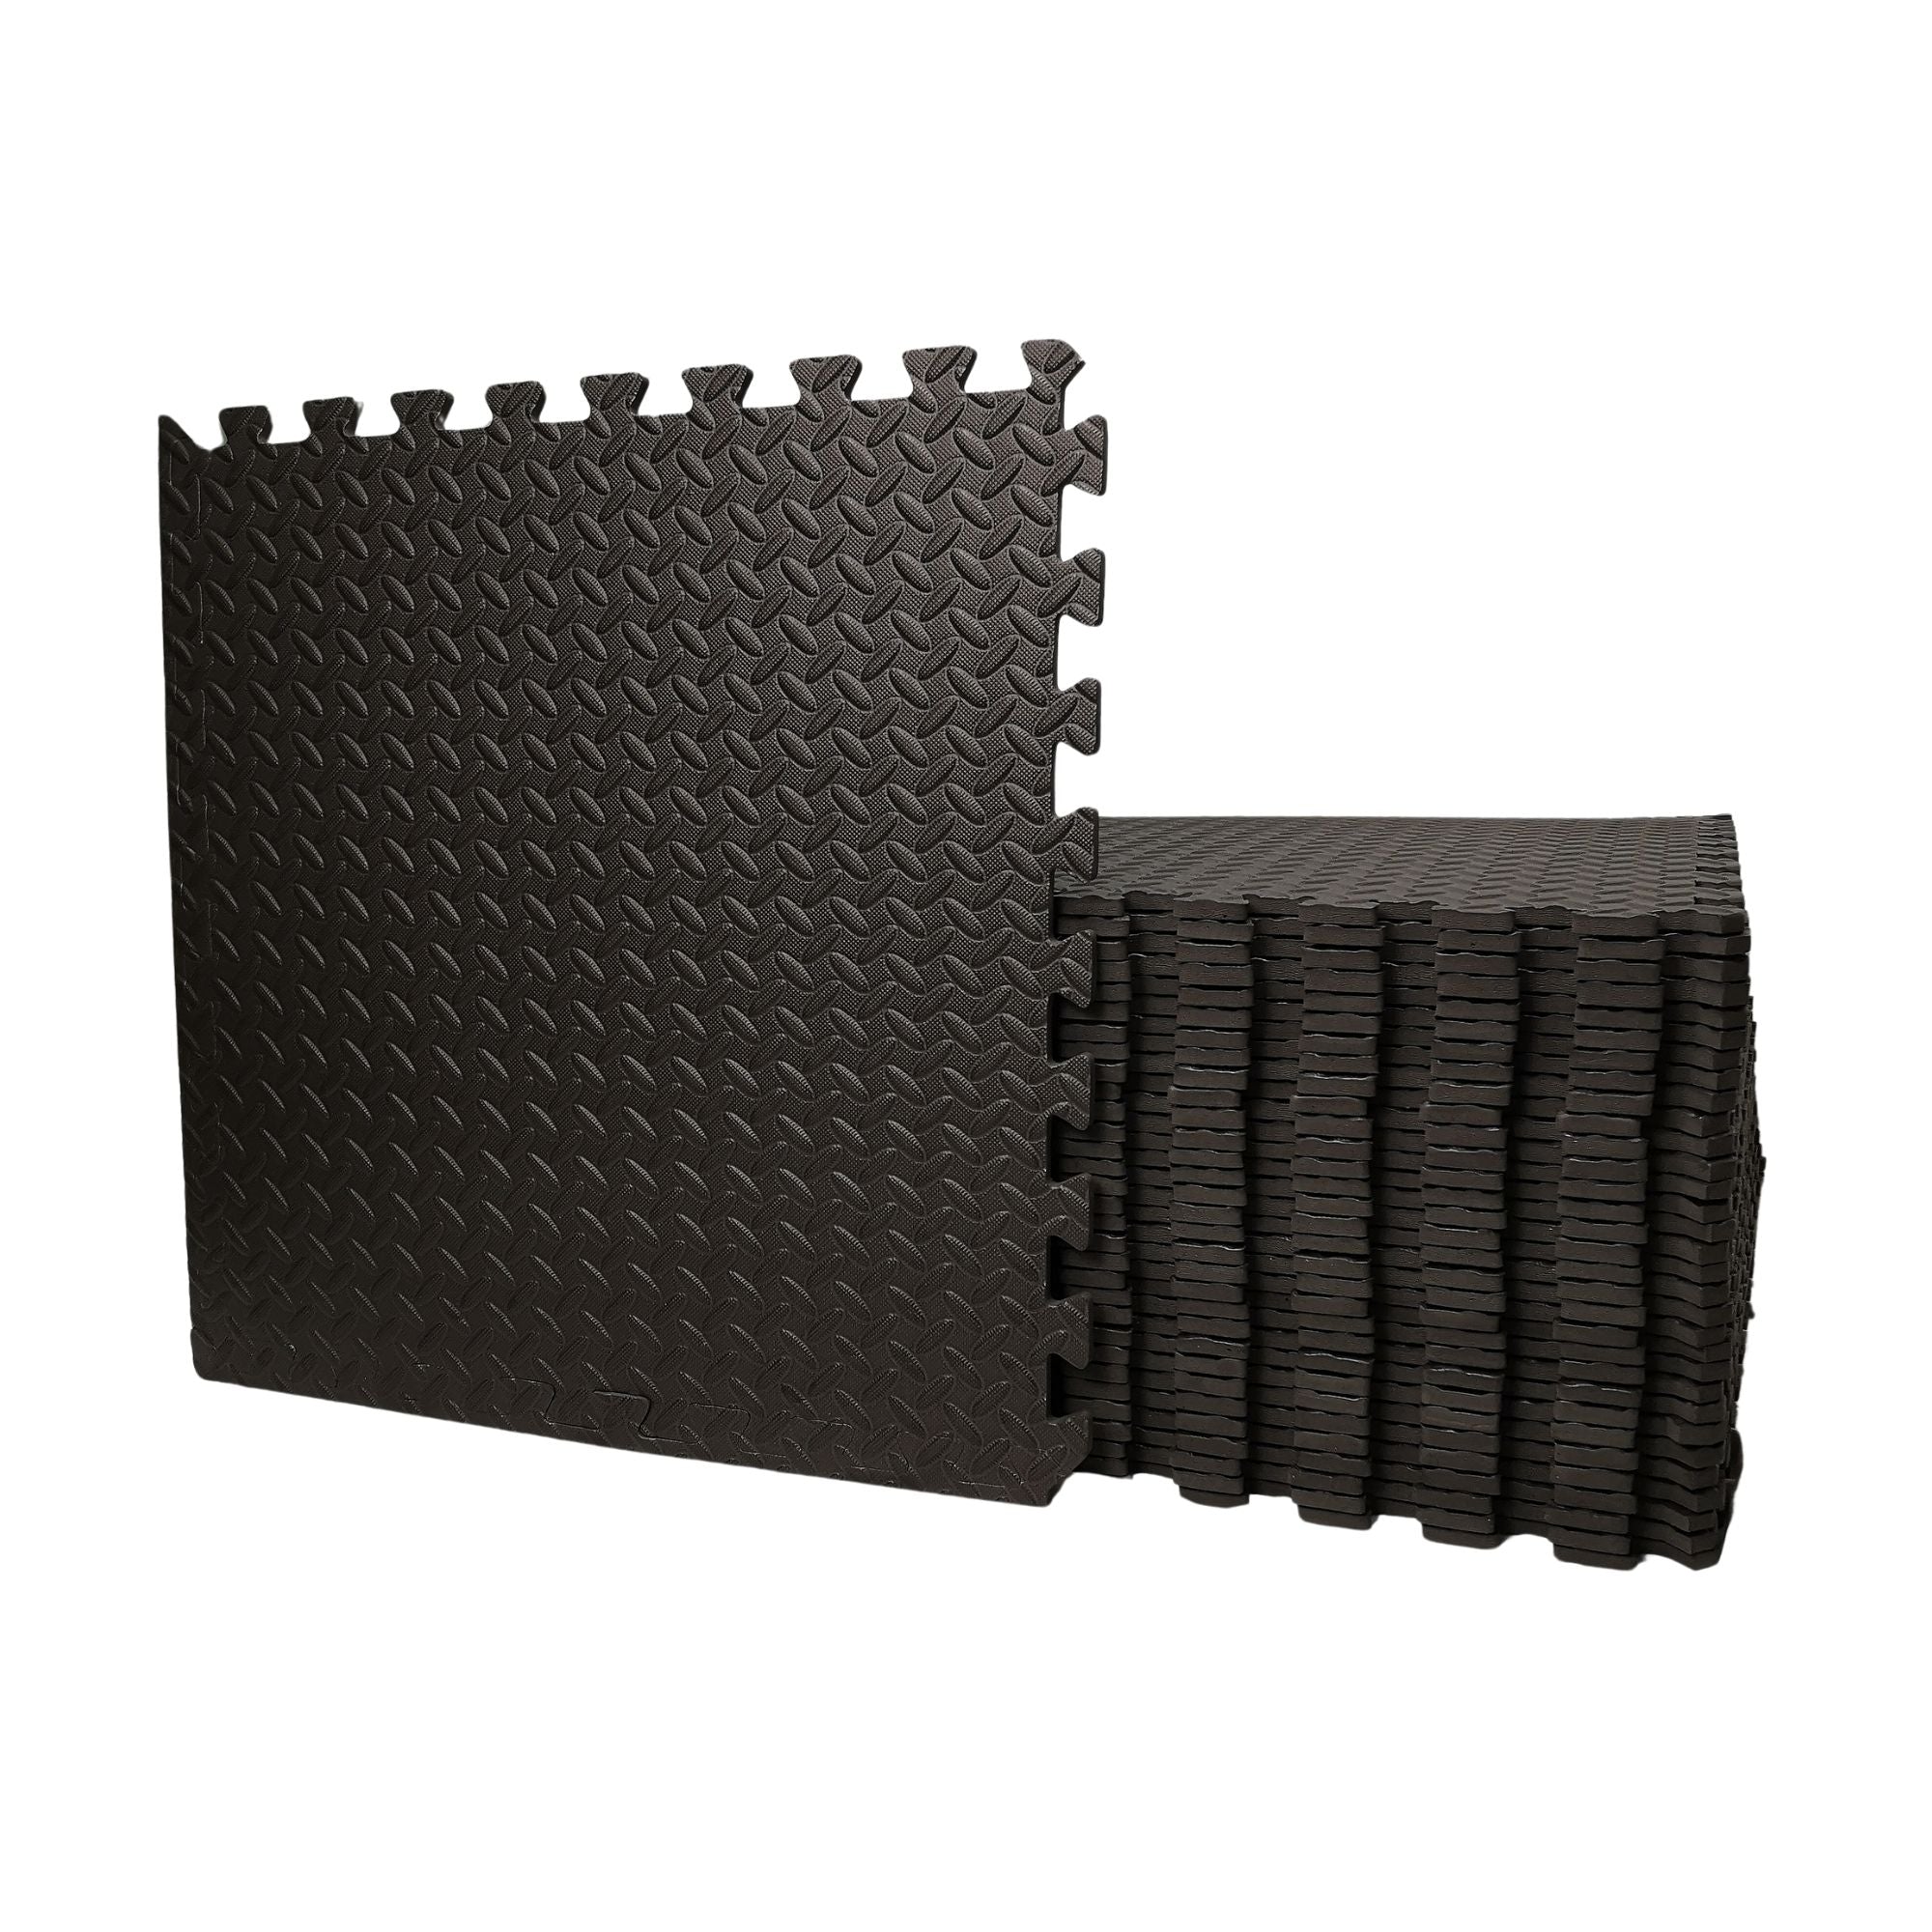 4 Piece EVA Foam Floor Protective Floor Tiles / Mats 60x60cm Each Set For Gyms, Kitchens, Garages, Camping, Kids Play Matting, Hot Tub Flooring Mats And Much More Set Covers 1.44 sqm (15.5 sq ft)